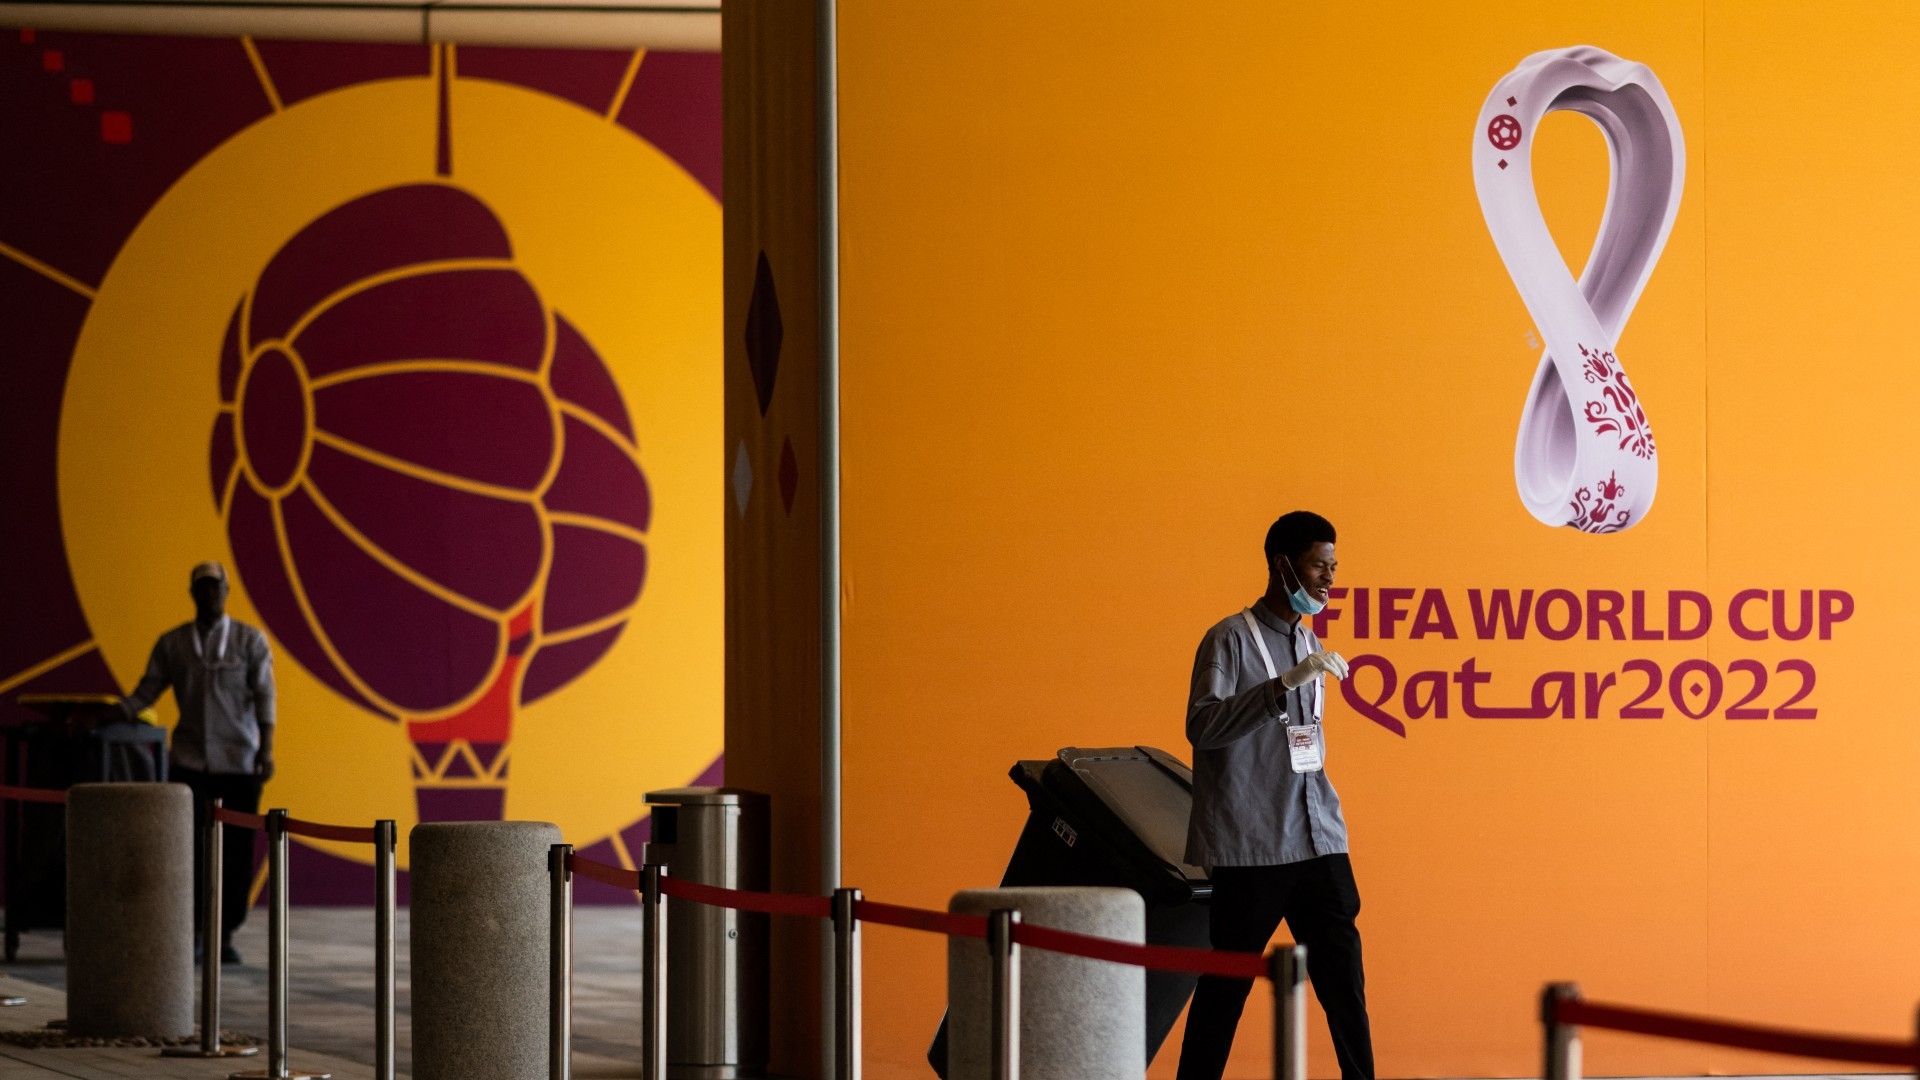 Workers move trash bins past Qatar 2022 FIFA World Cup football tournament posters in Doha on 21 October 2022 (AFP)